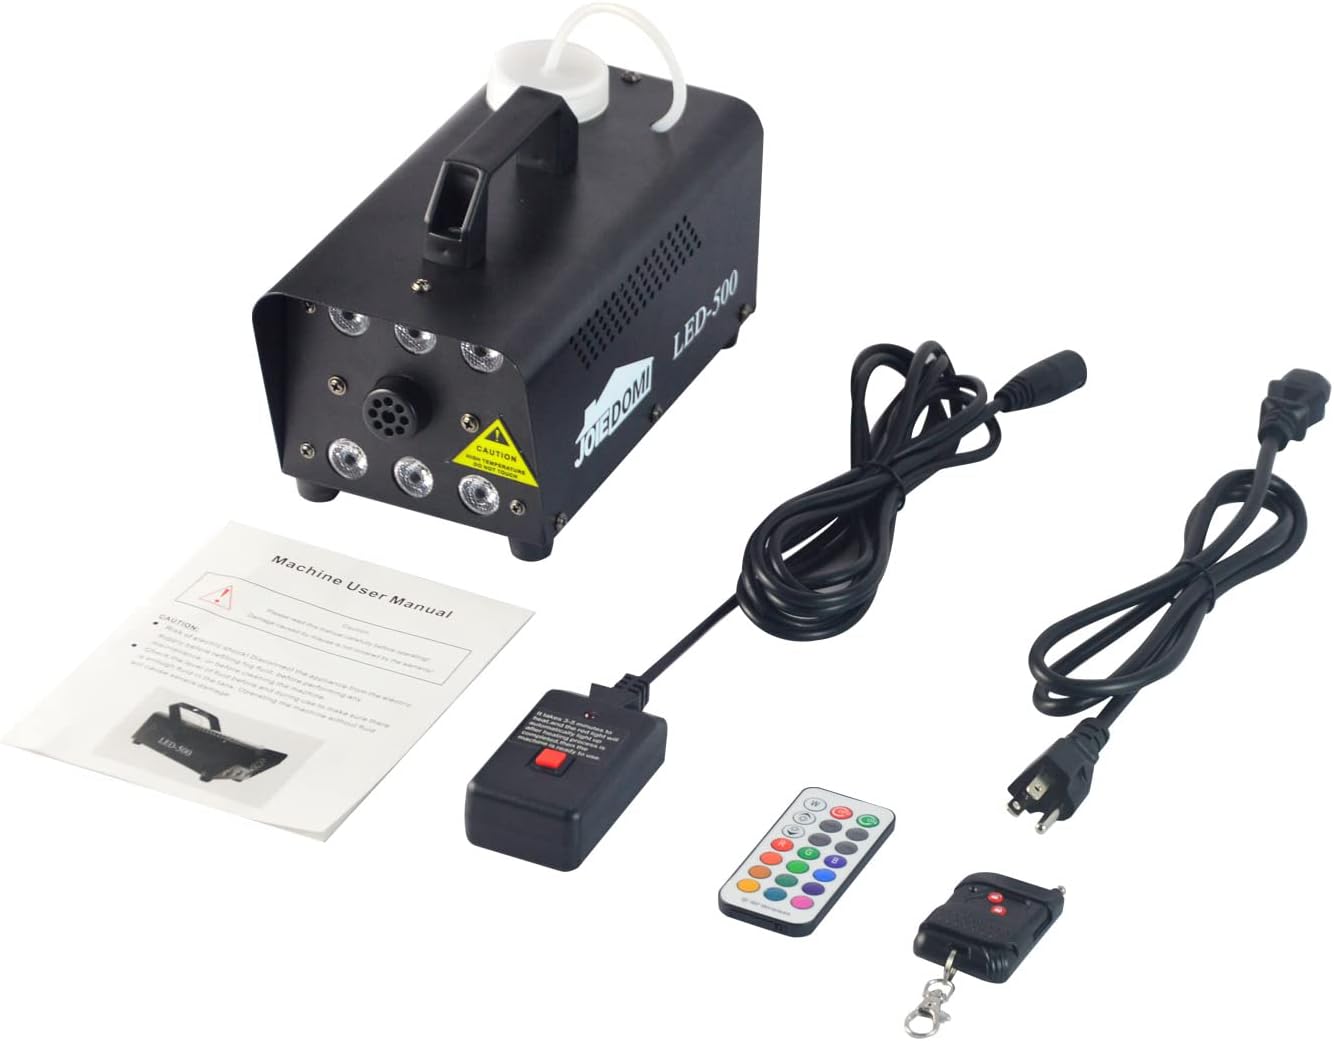 500W Fog Machine with 6 Multicolor LED Lights (Remote Control)